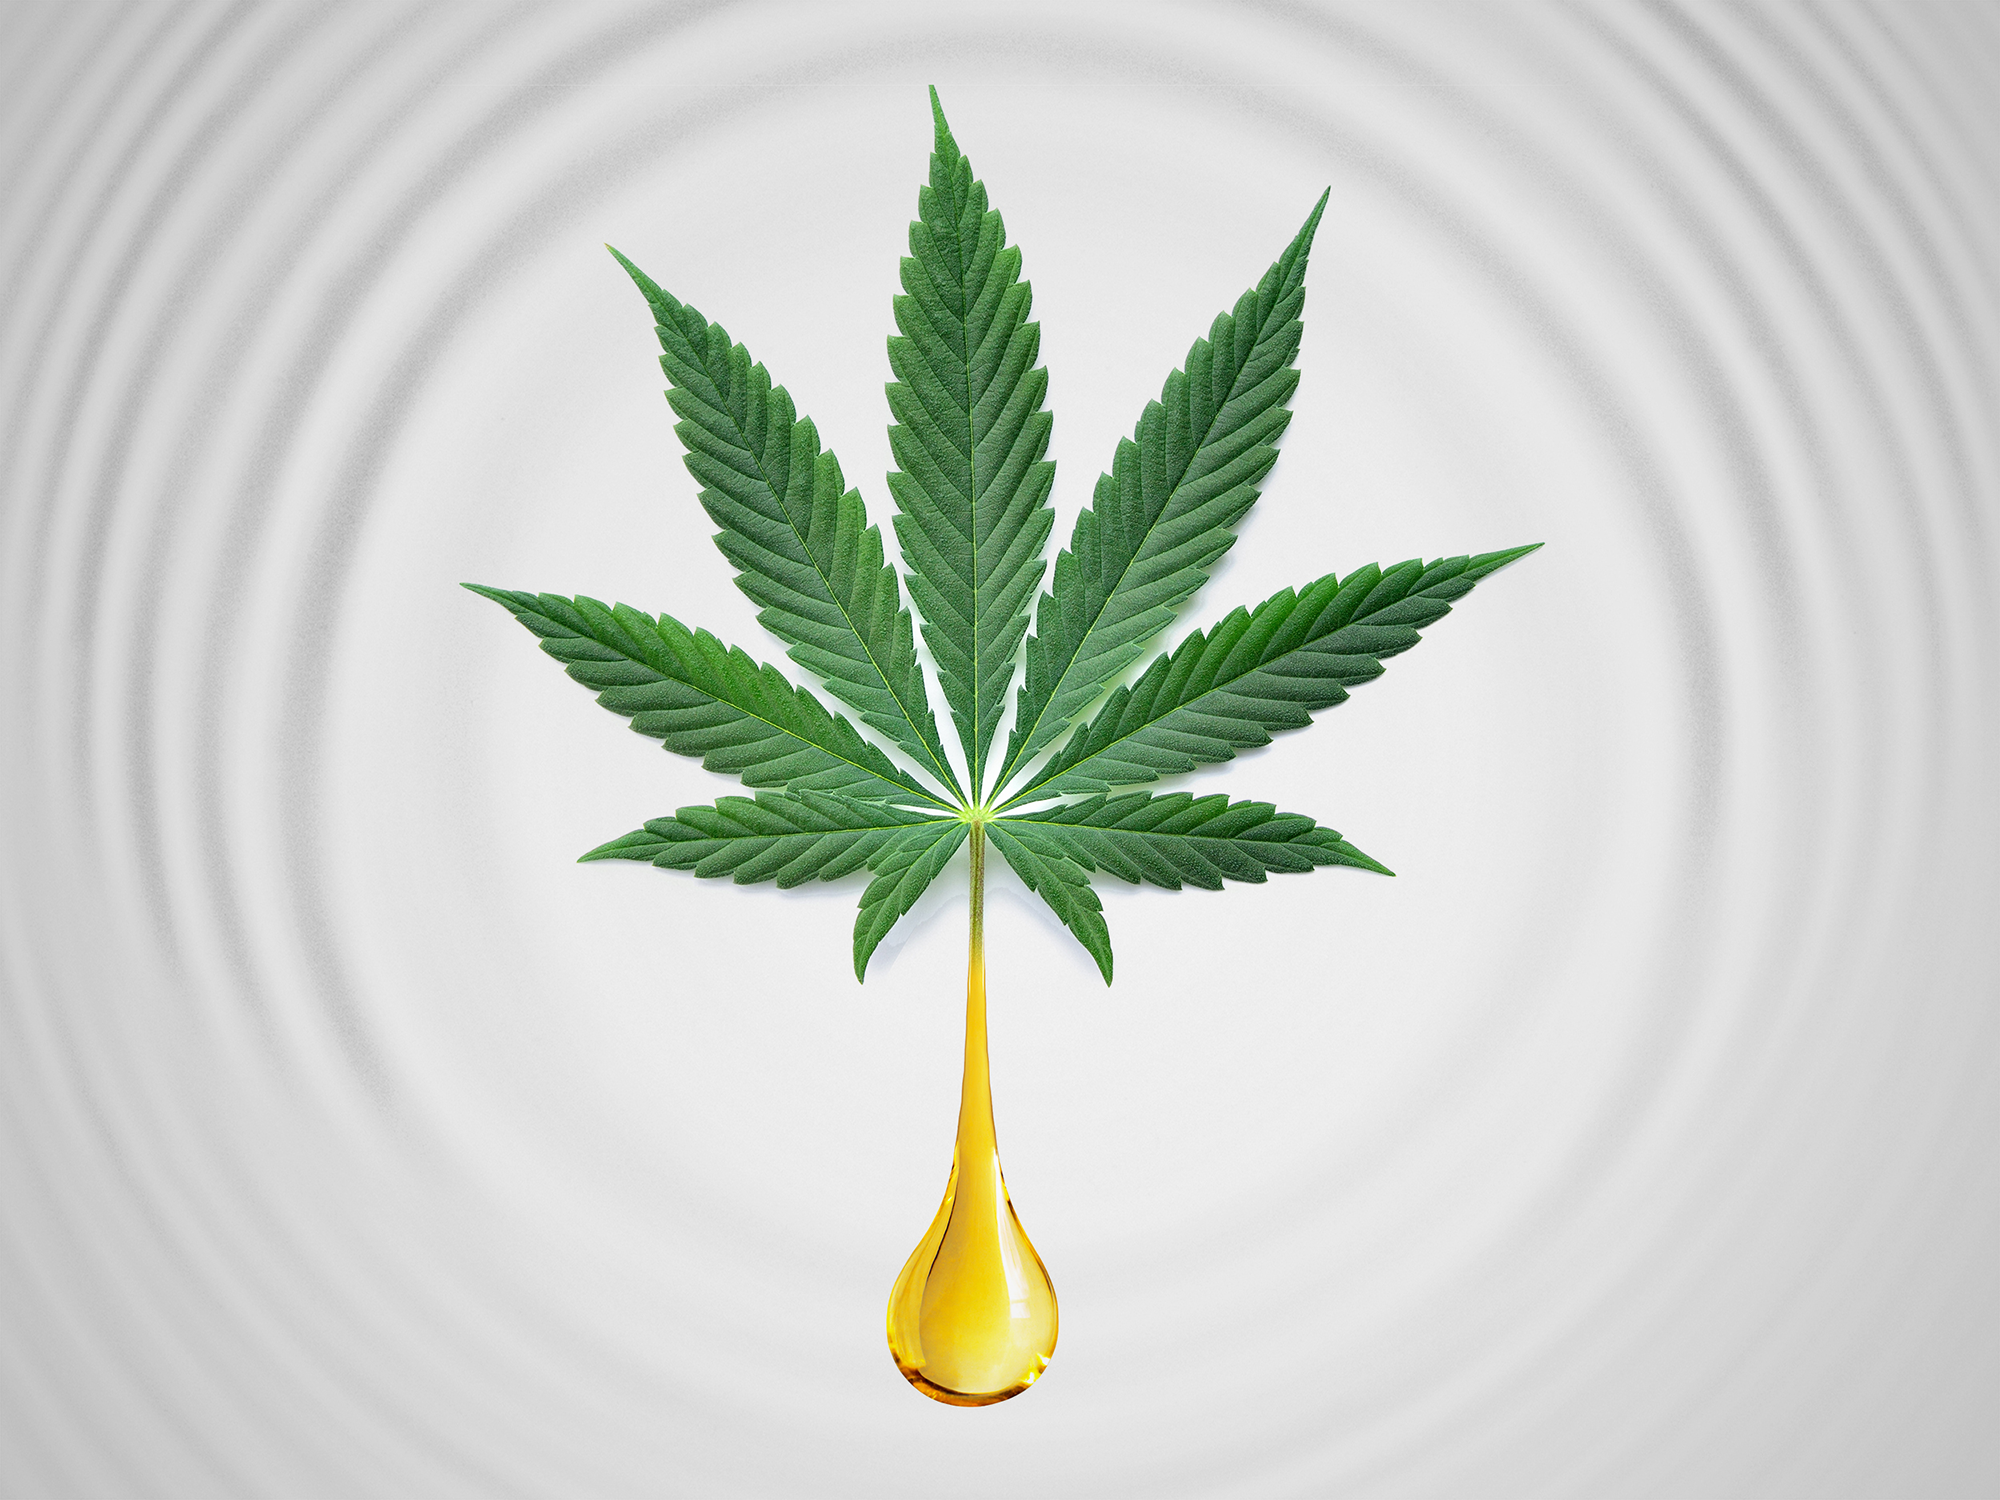 A graphic image representing cannabis concentrate being extracted from a cannabis leaf